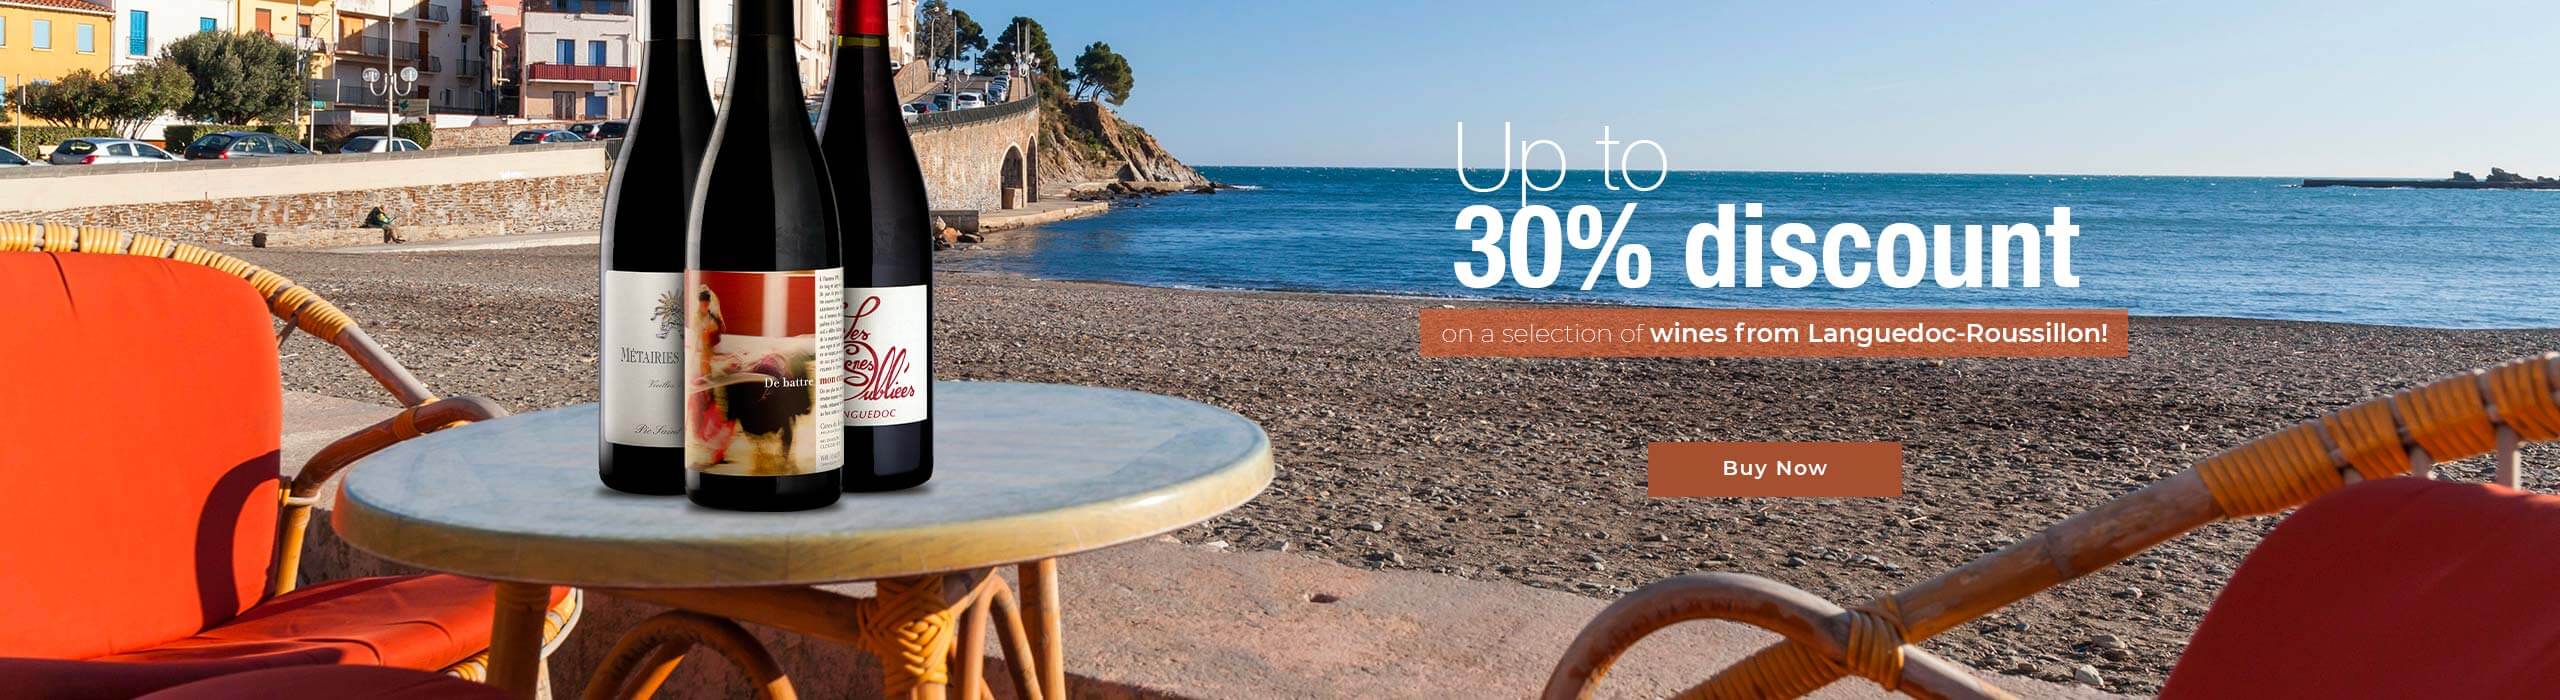 Languedoc-Roussillon: up to 30% discount on a selection of wines!